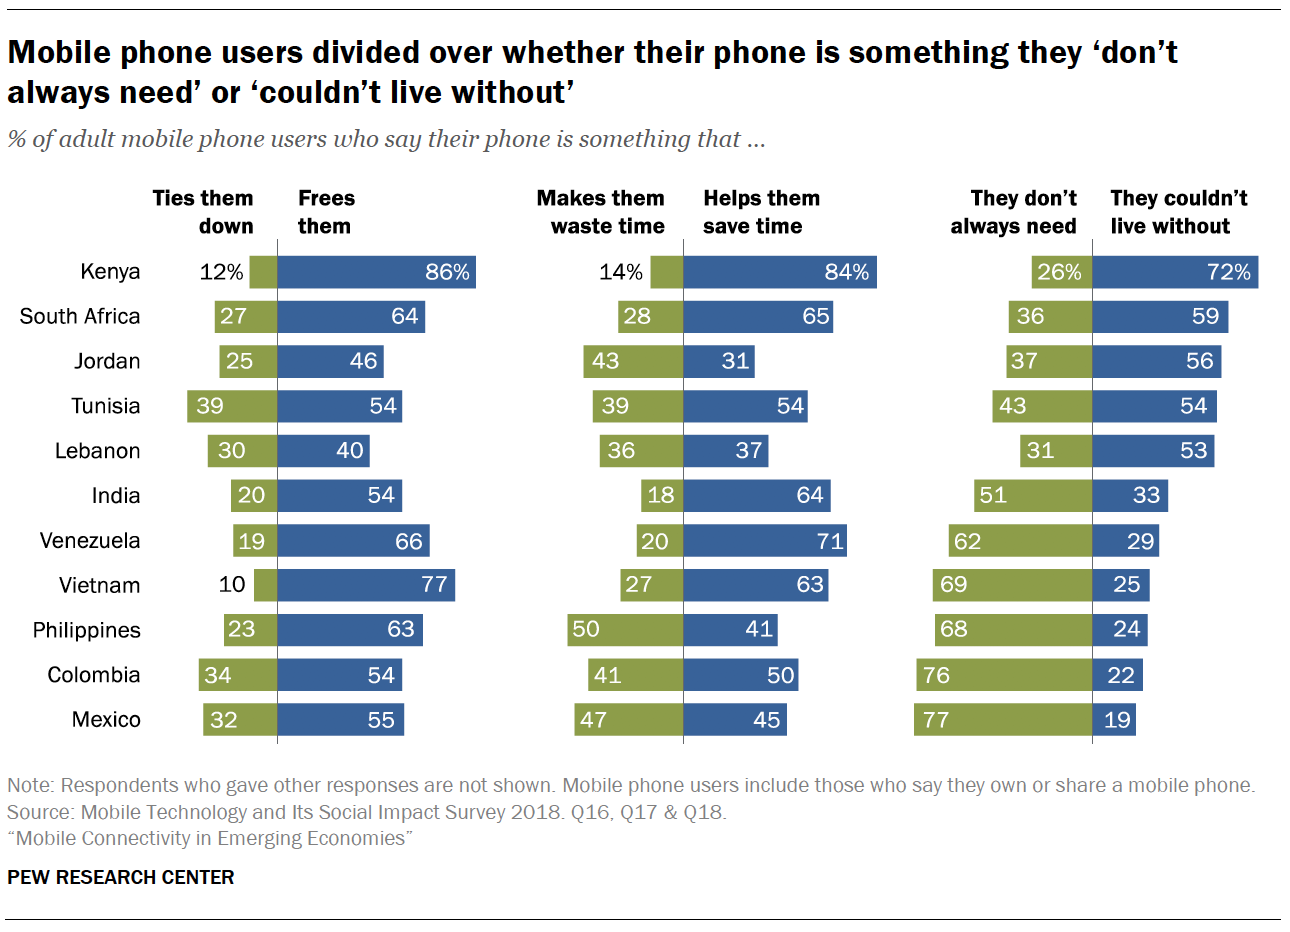 Mobile phone users divided over whether their phone is something they ‘don’t always need’ or ‘couldn’t live without’